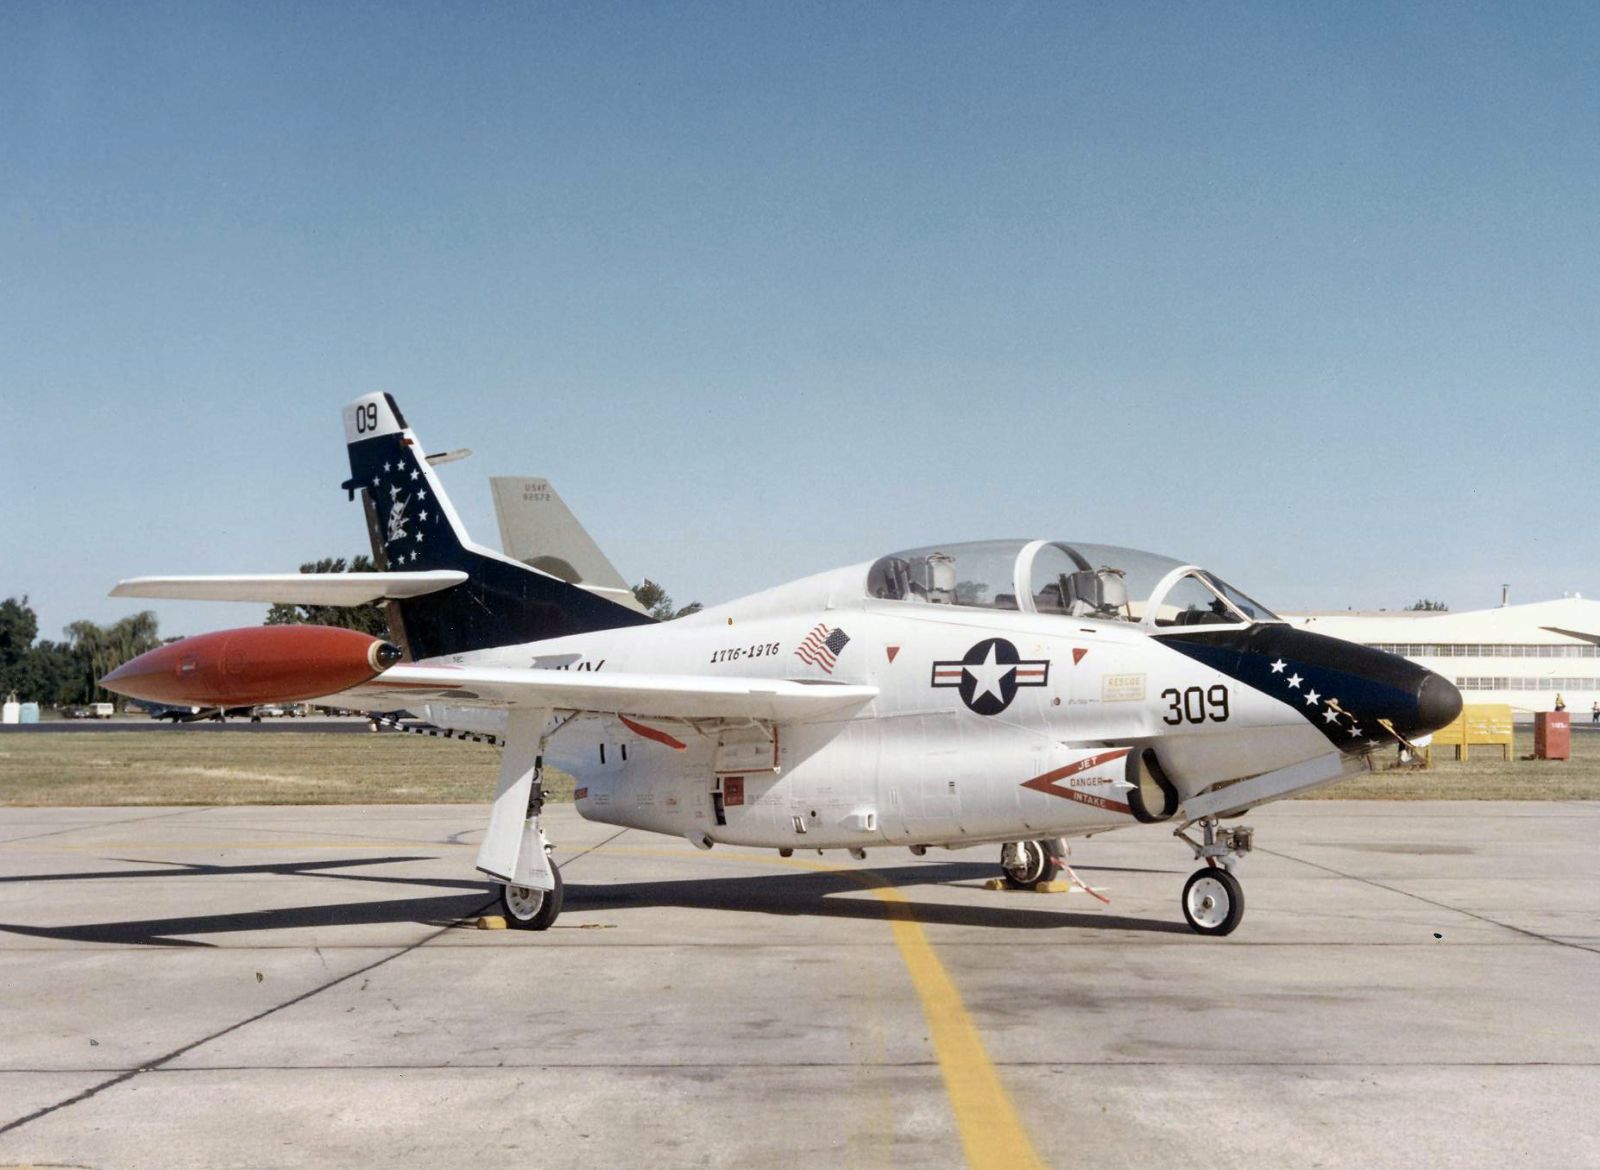 U.S. Navy Rockwell T-2C Buckeye of VT 23 painted in a Bicentennial paint scheme, at Offutt Air Force Base